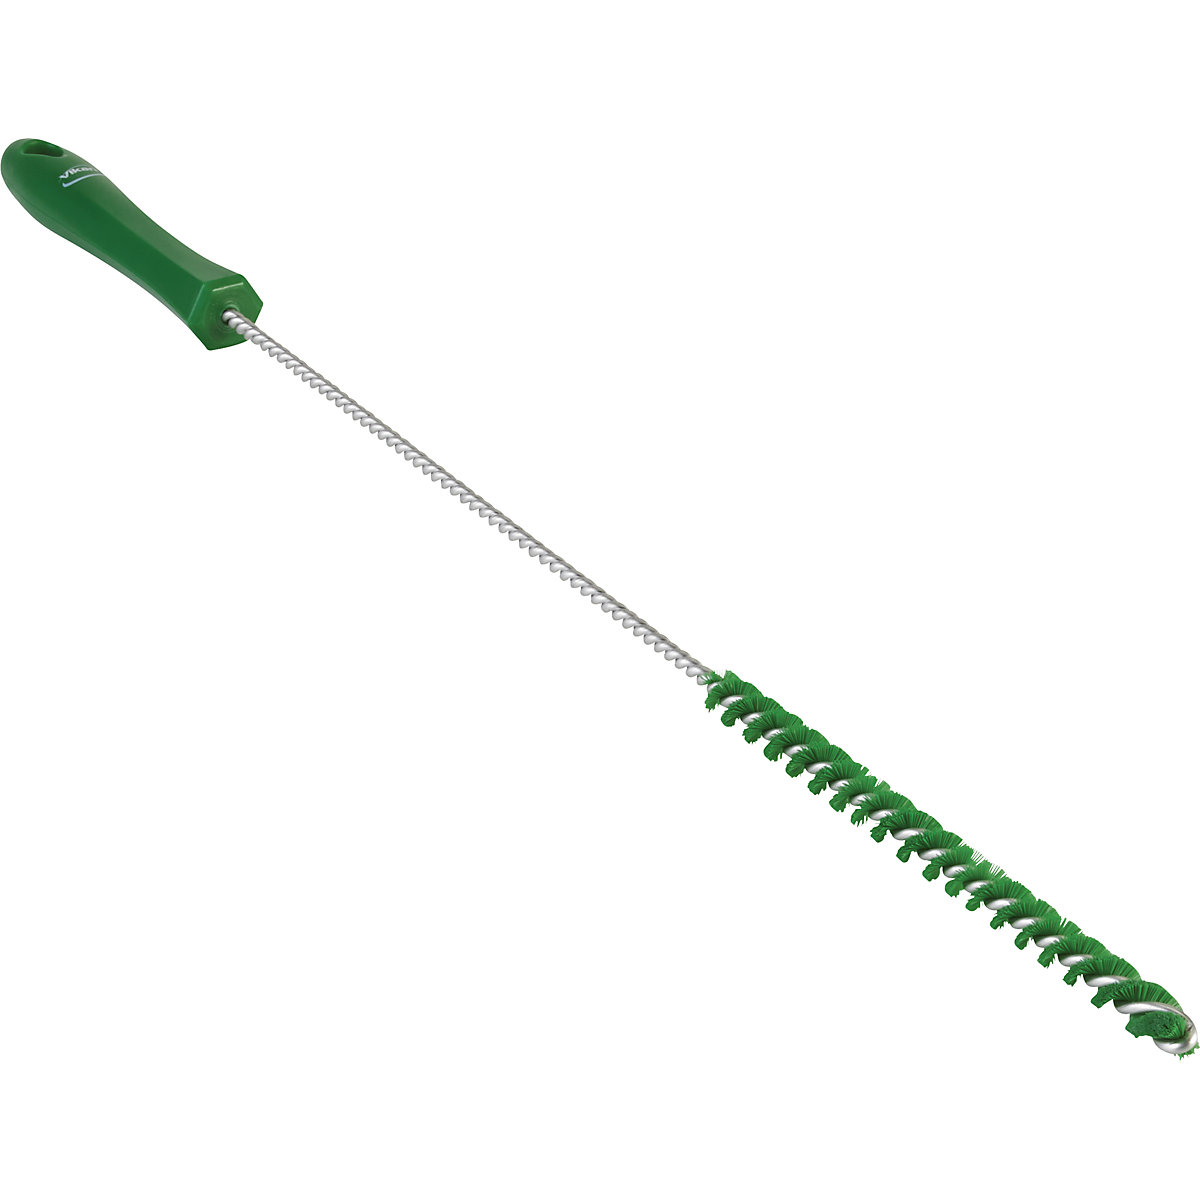 Pipe brush with handle – Vikan, hard, Ø 10 mm, pack of 15, green-6